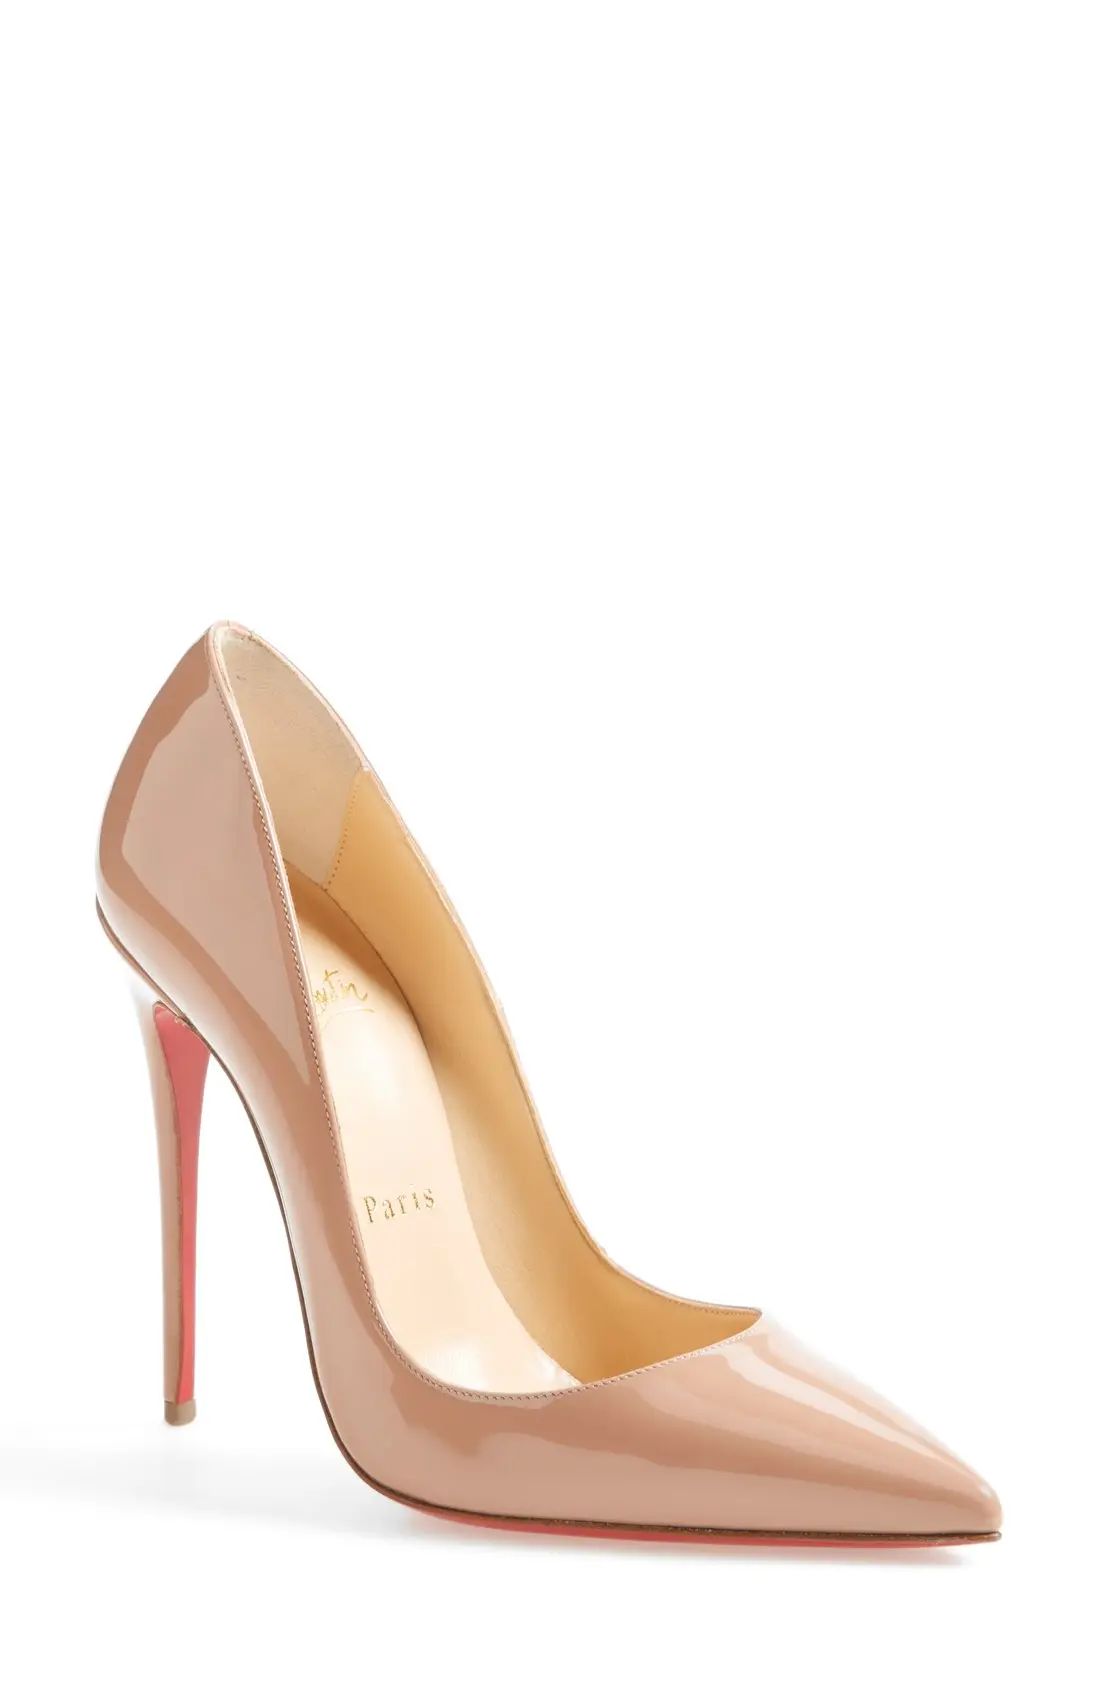 Christian Louboutin So Kate Pointed Toe Pump in Nude at Nordstrom, Size 13Us | Nordstrom